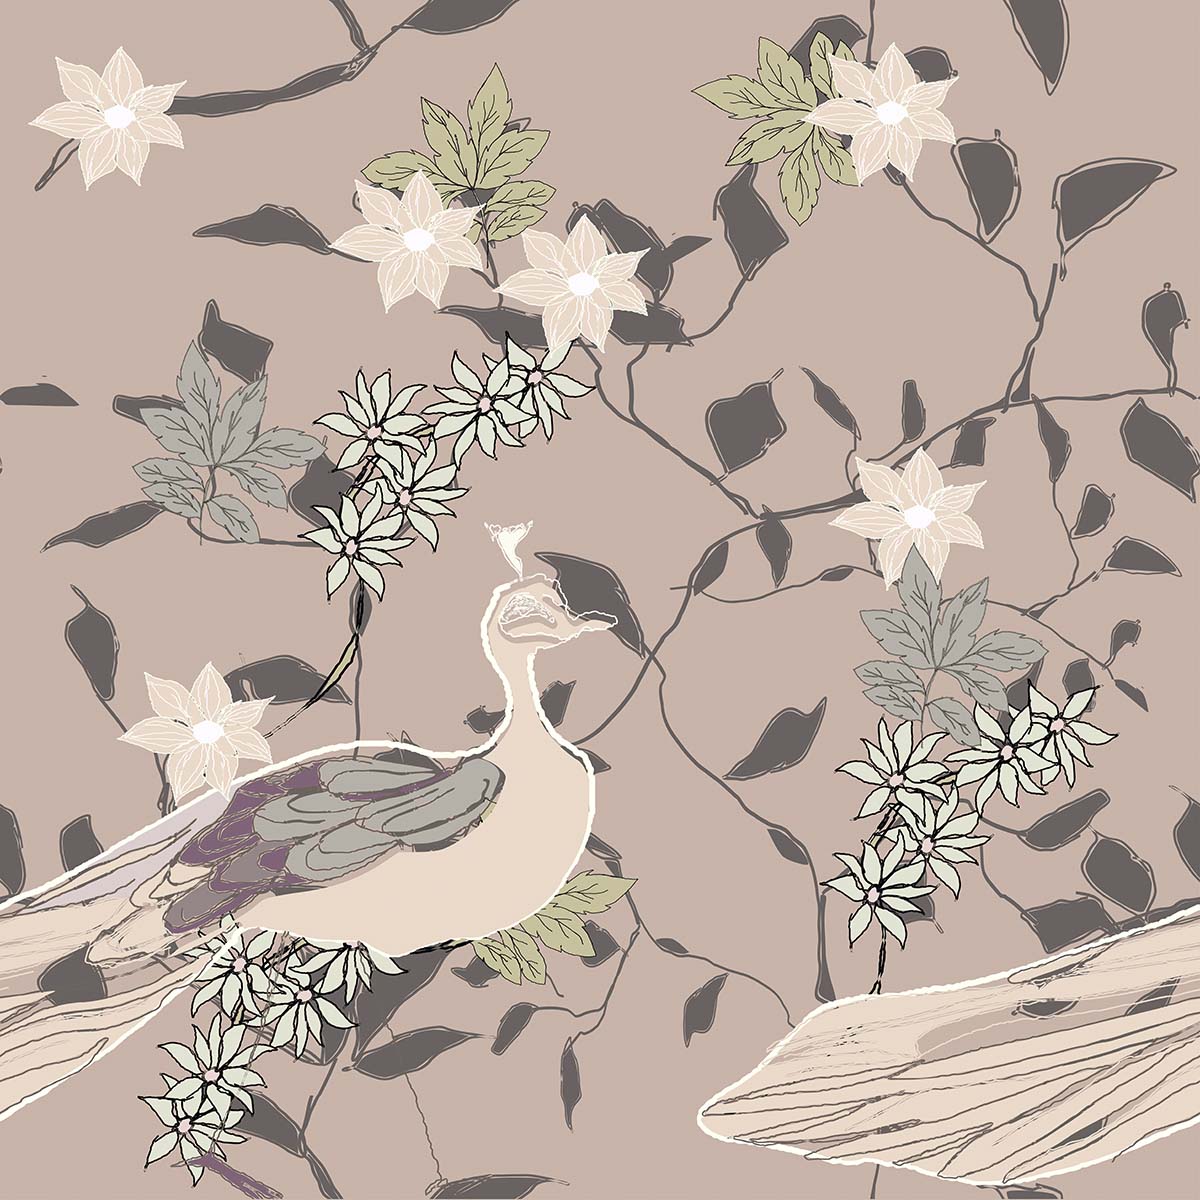 A bird with flowers and leaves